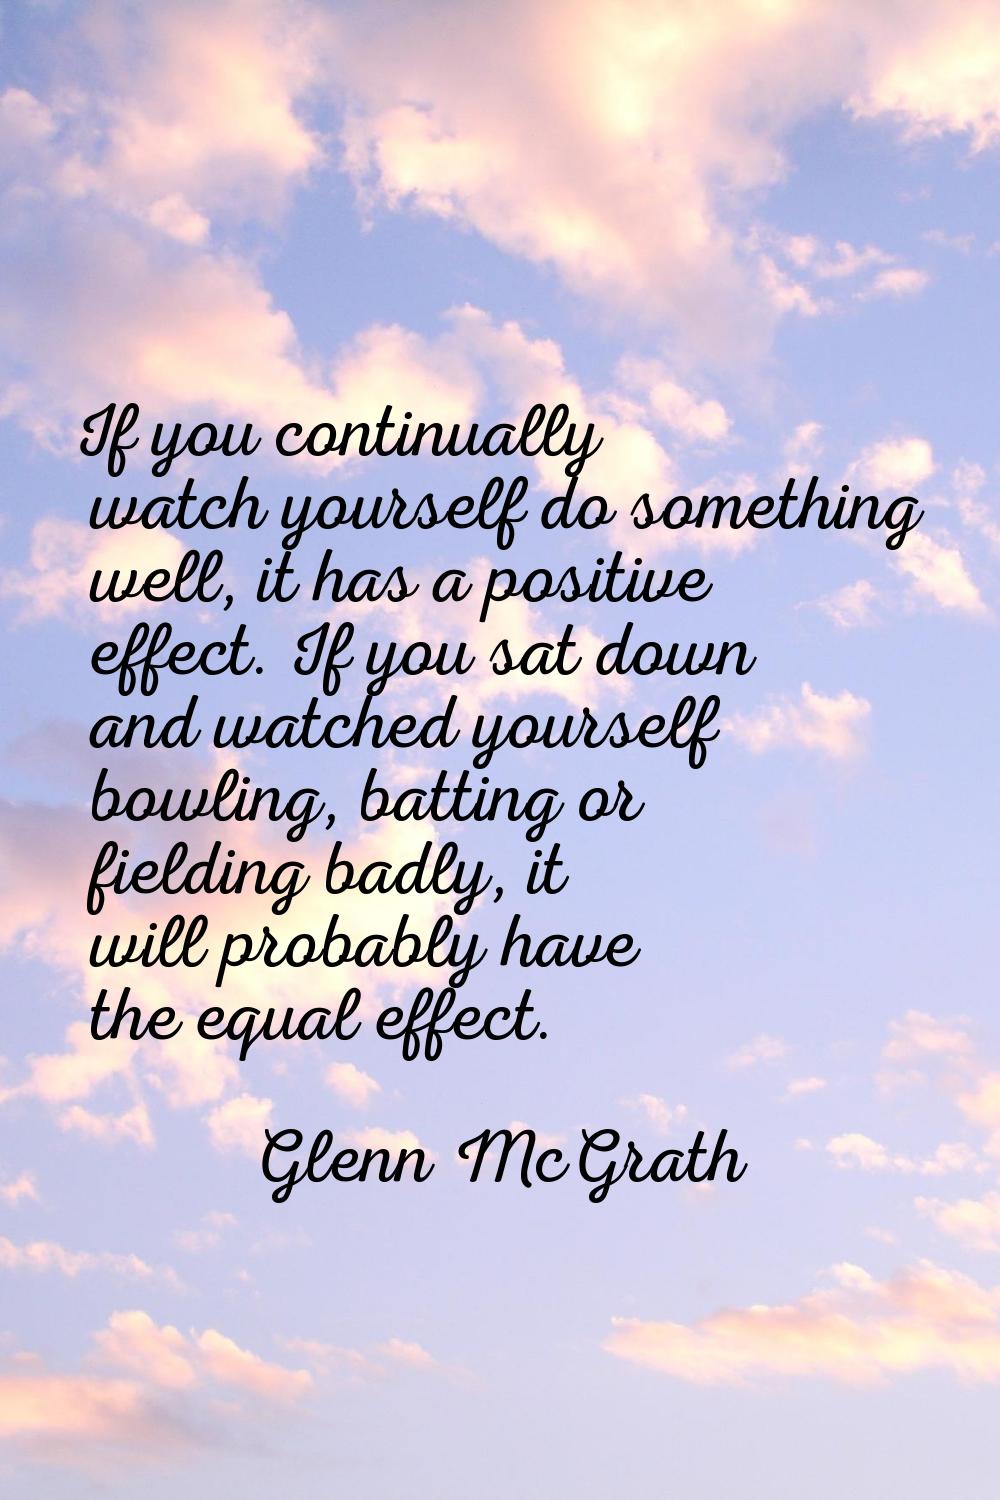 If you continually watch yourself do something well, it has a positive effect. If you sat down and 